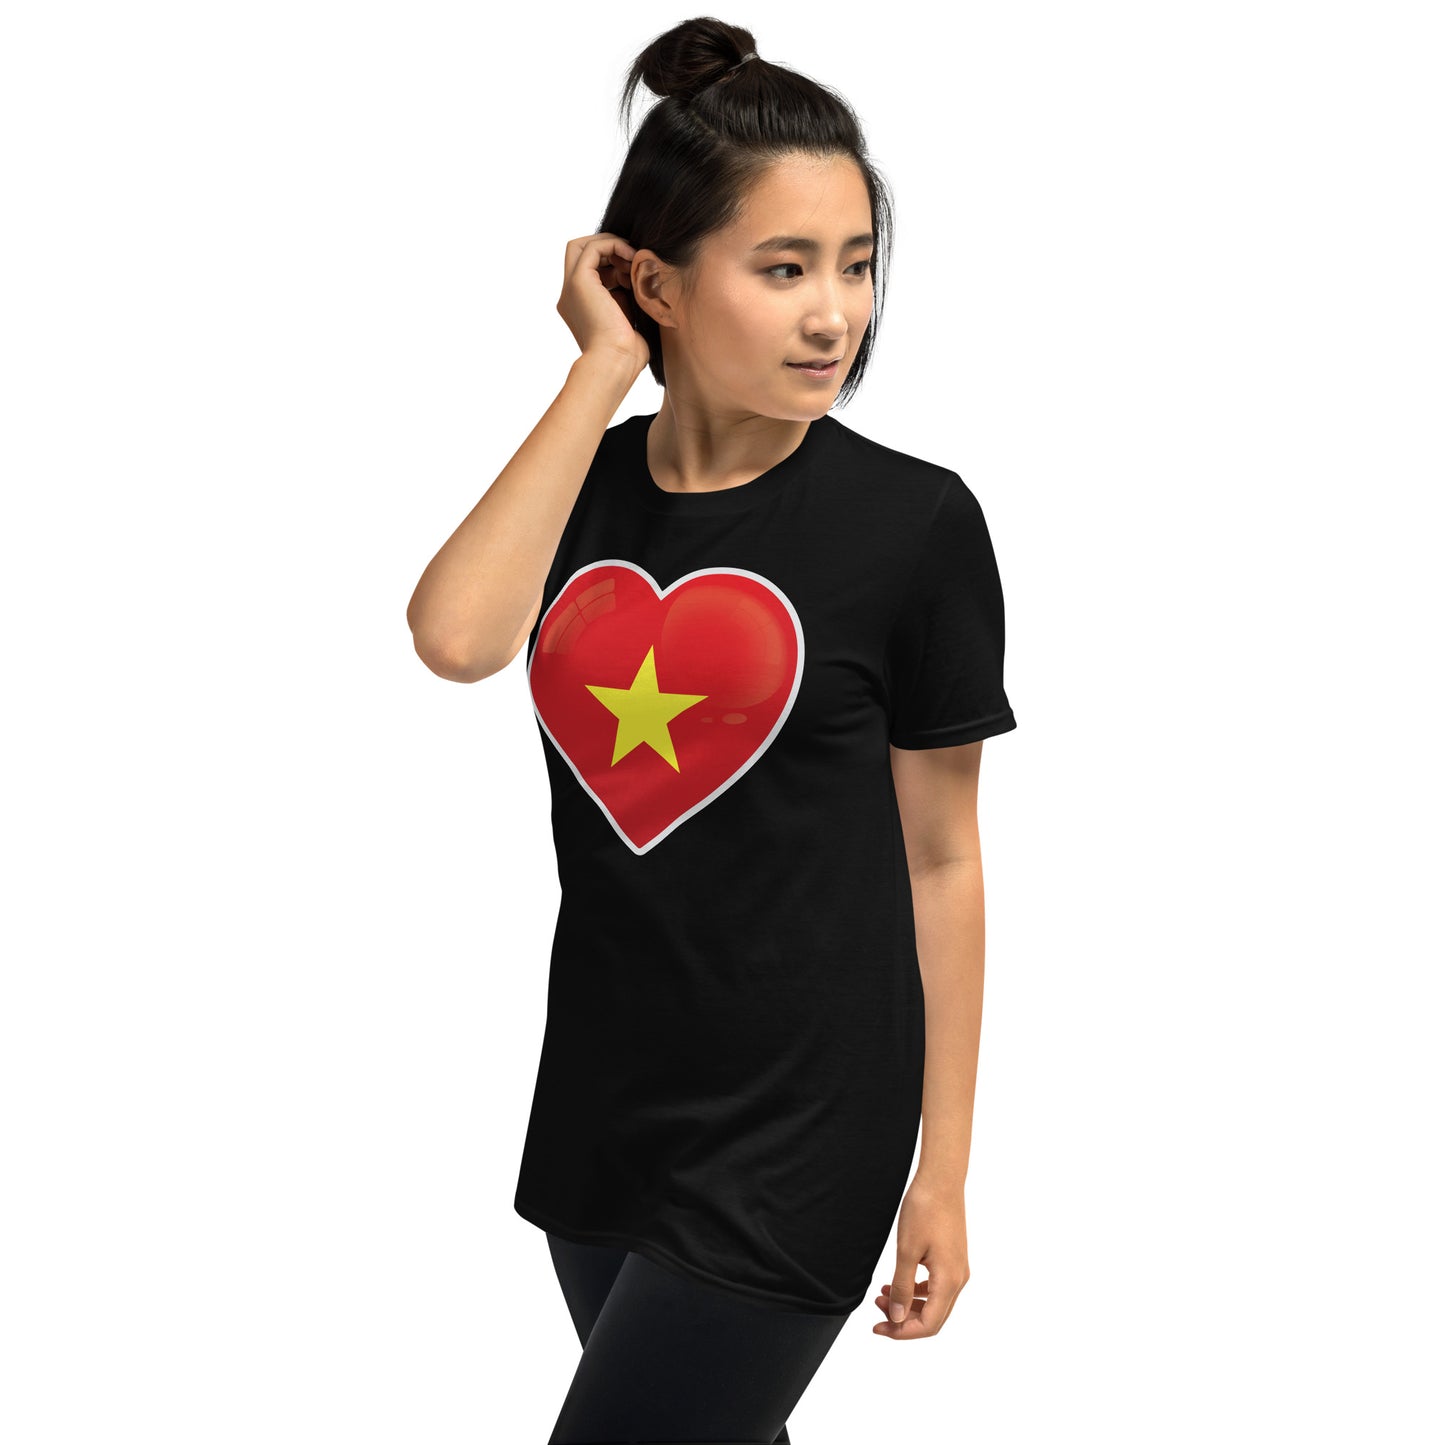 T-Shirt with Vietnamese red heart, show your love for Vietnam!